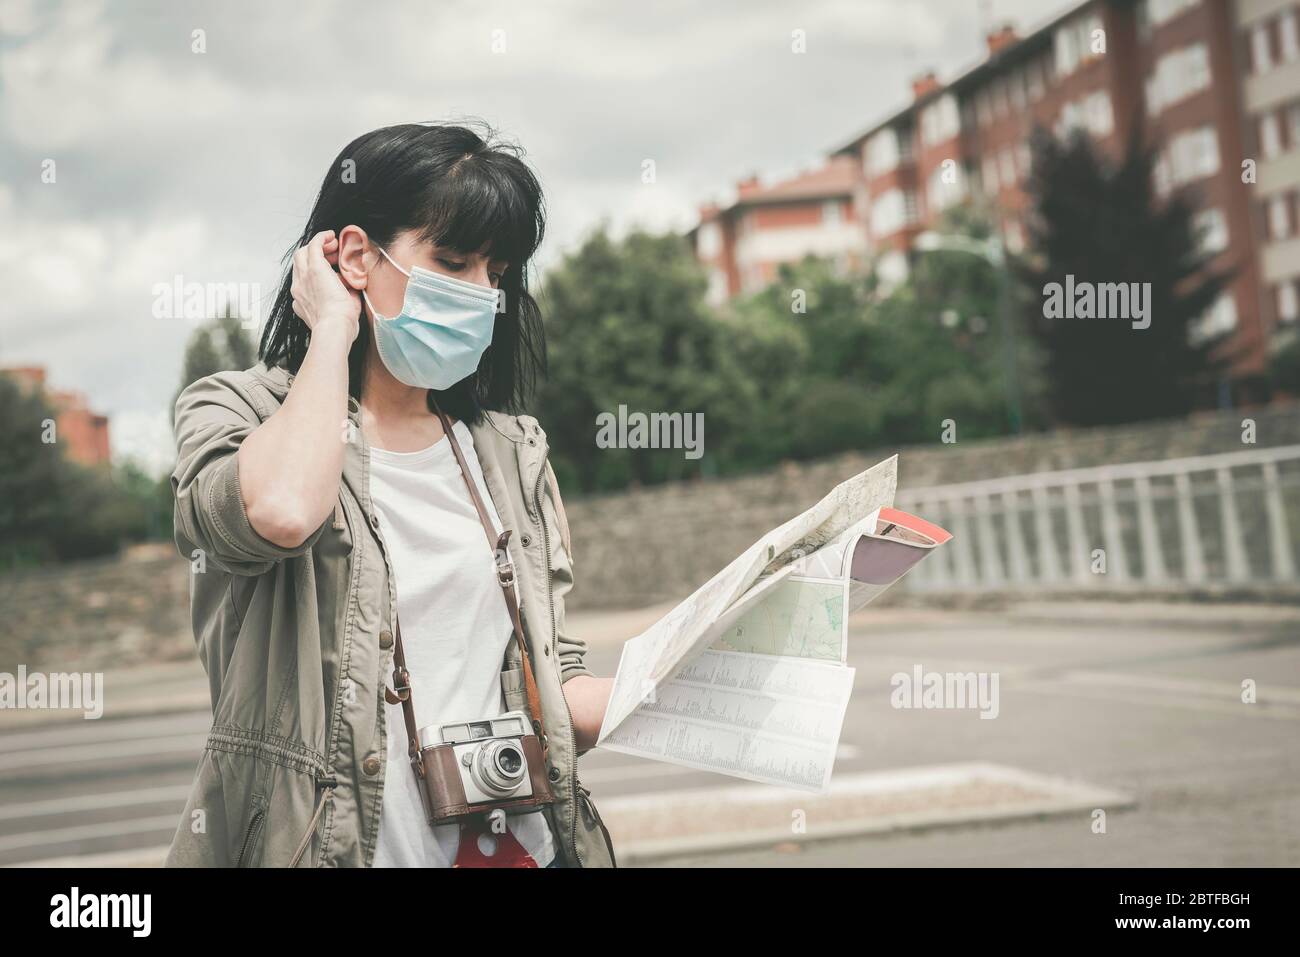 woman wearing medical mask with a camera look at a map of the city outdoor Stock Photo